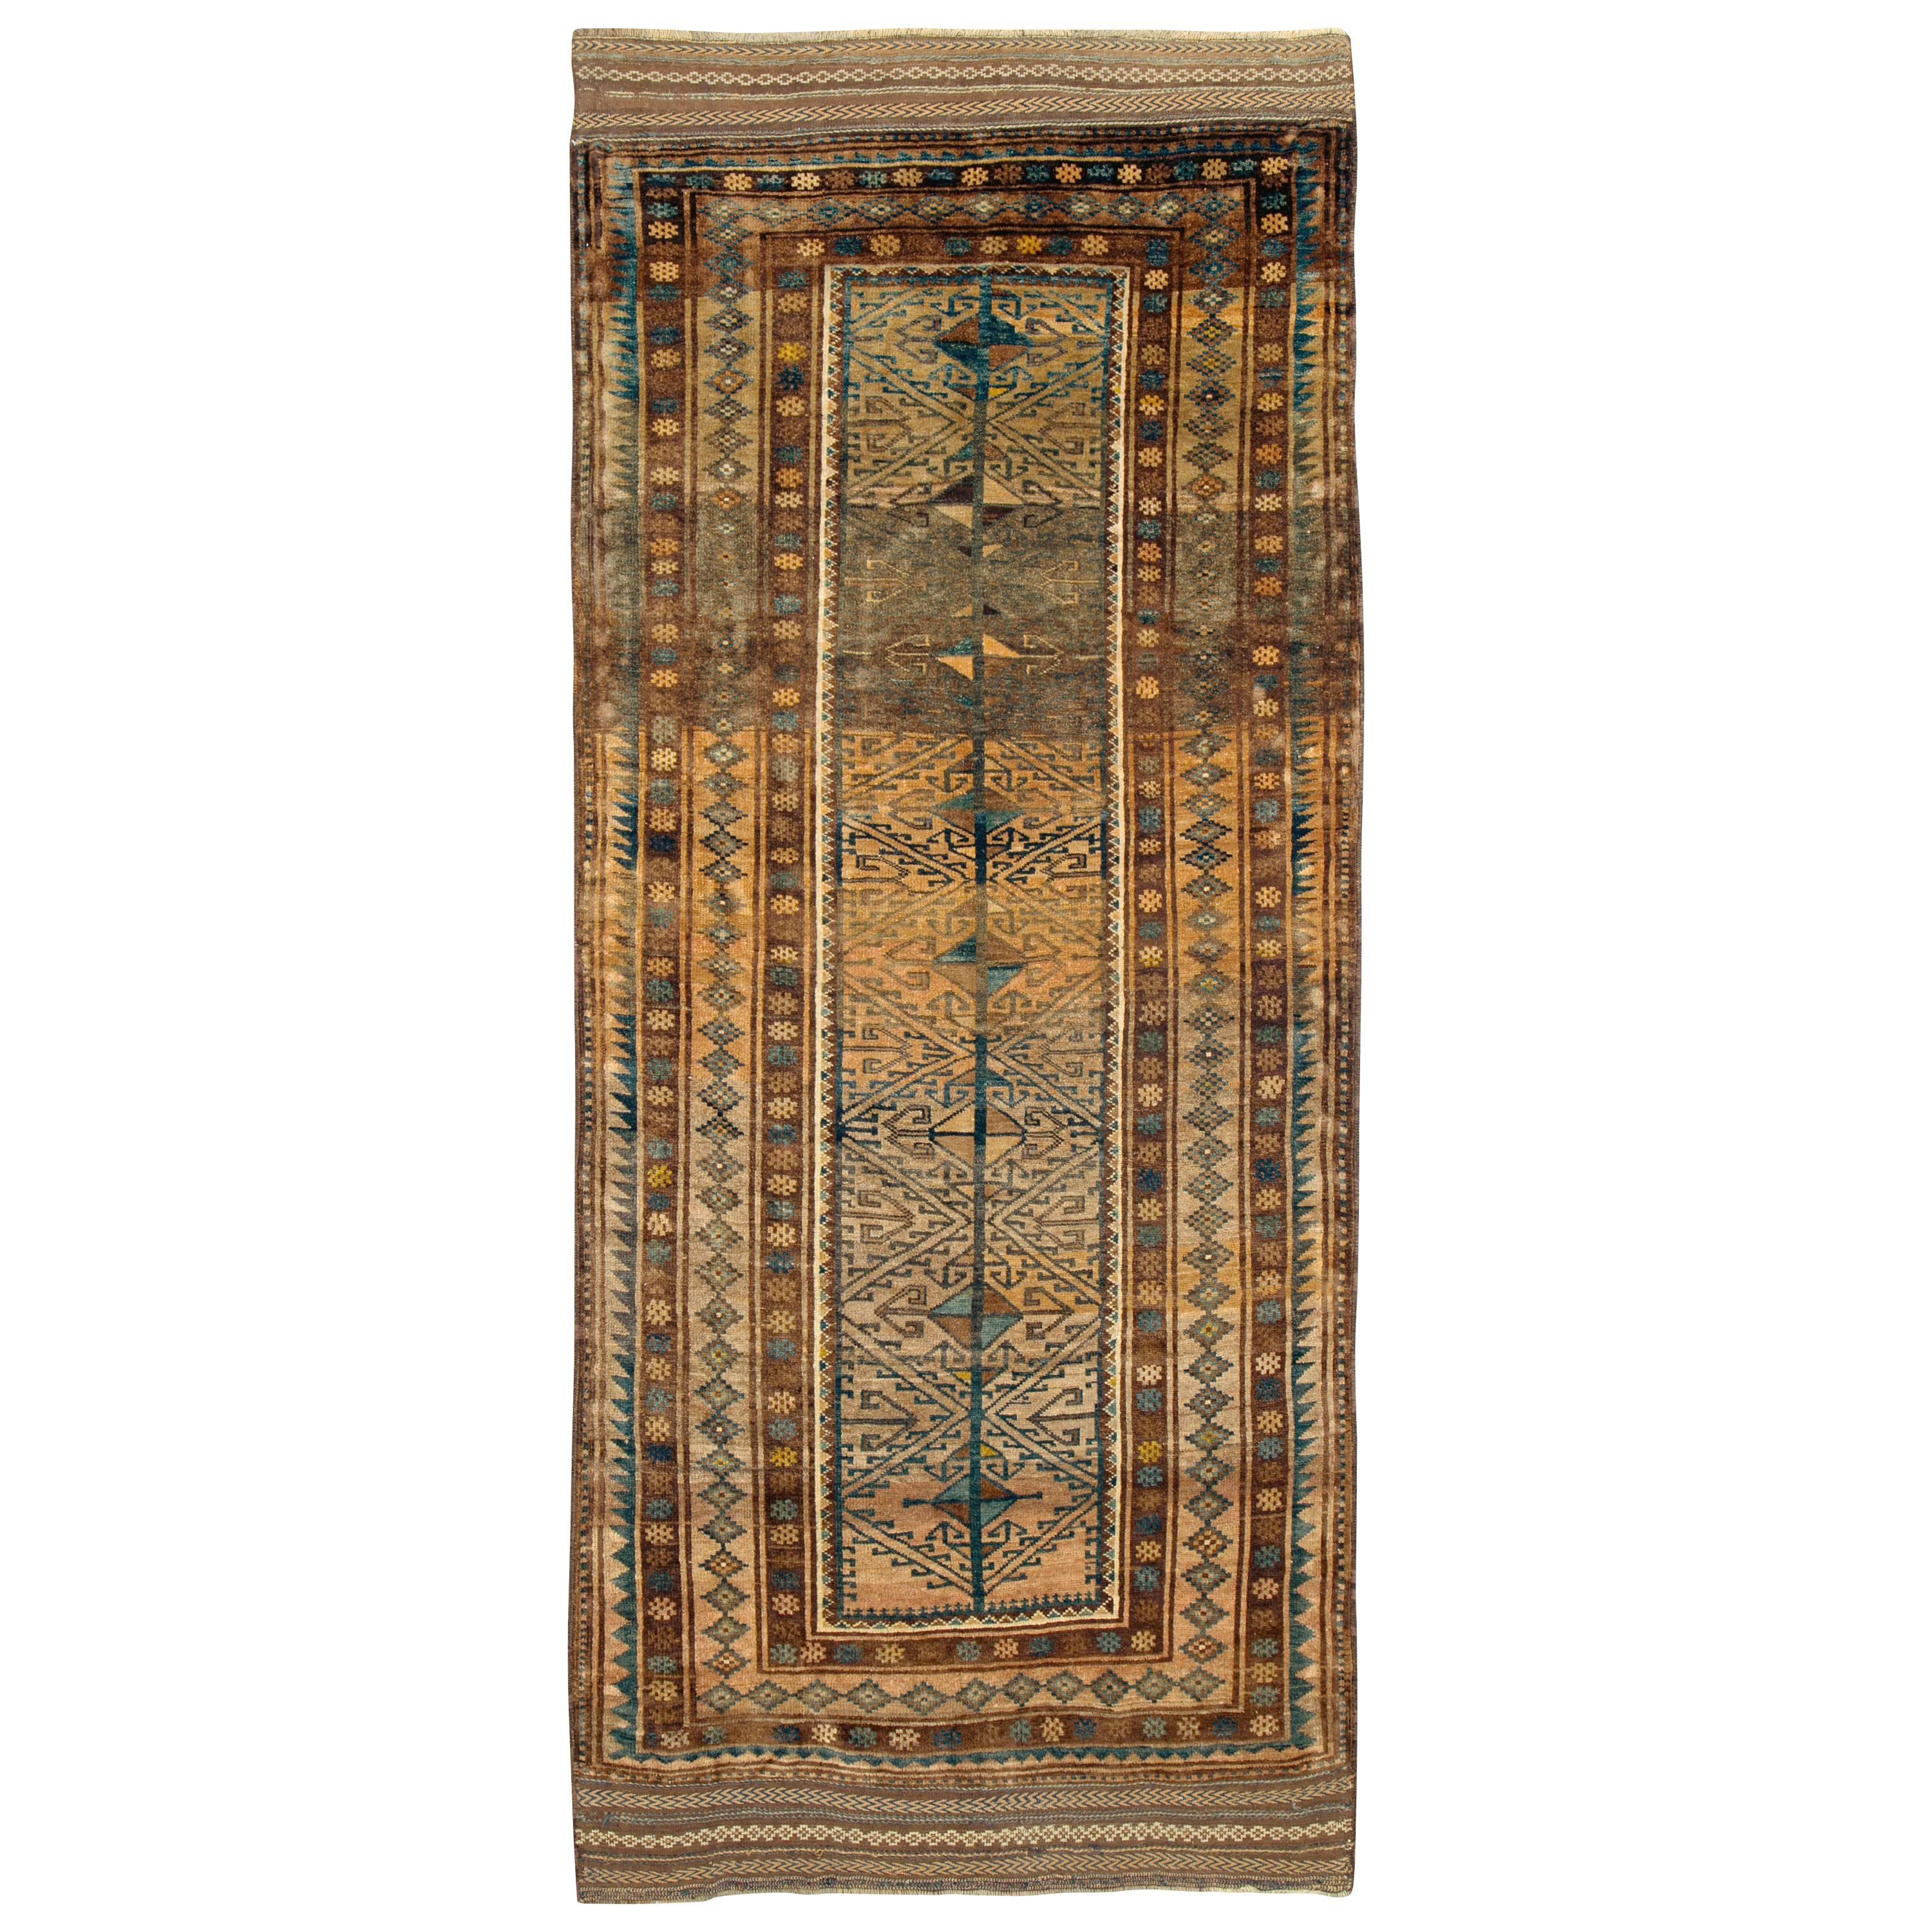 What is a Baluch rug?